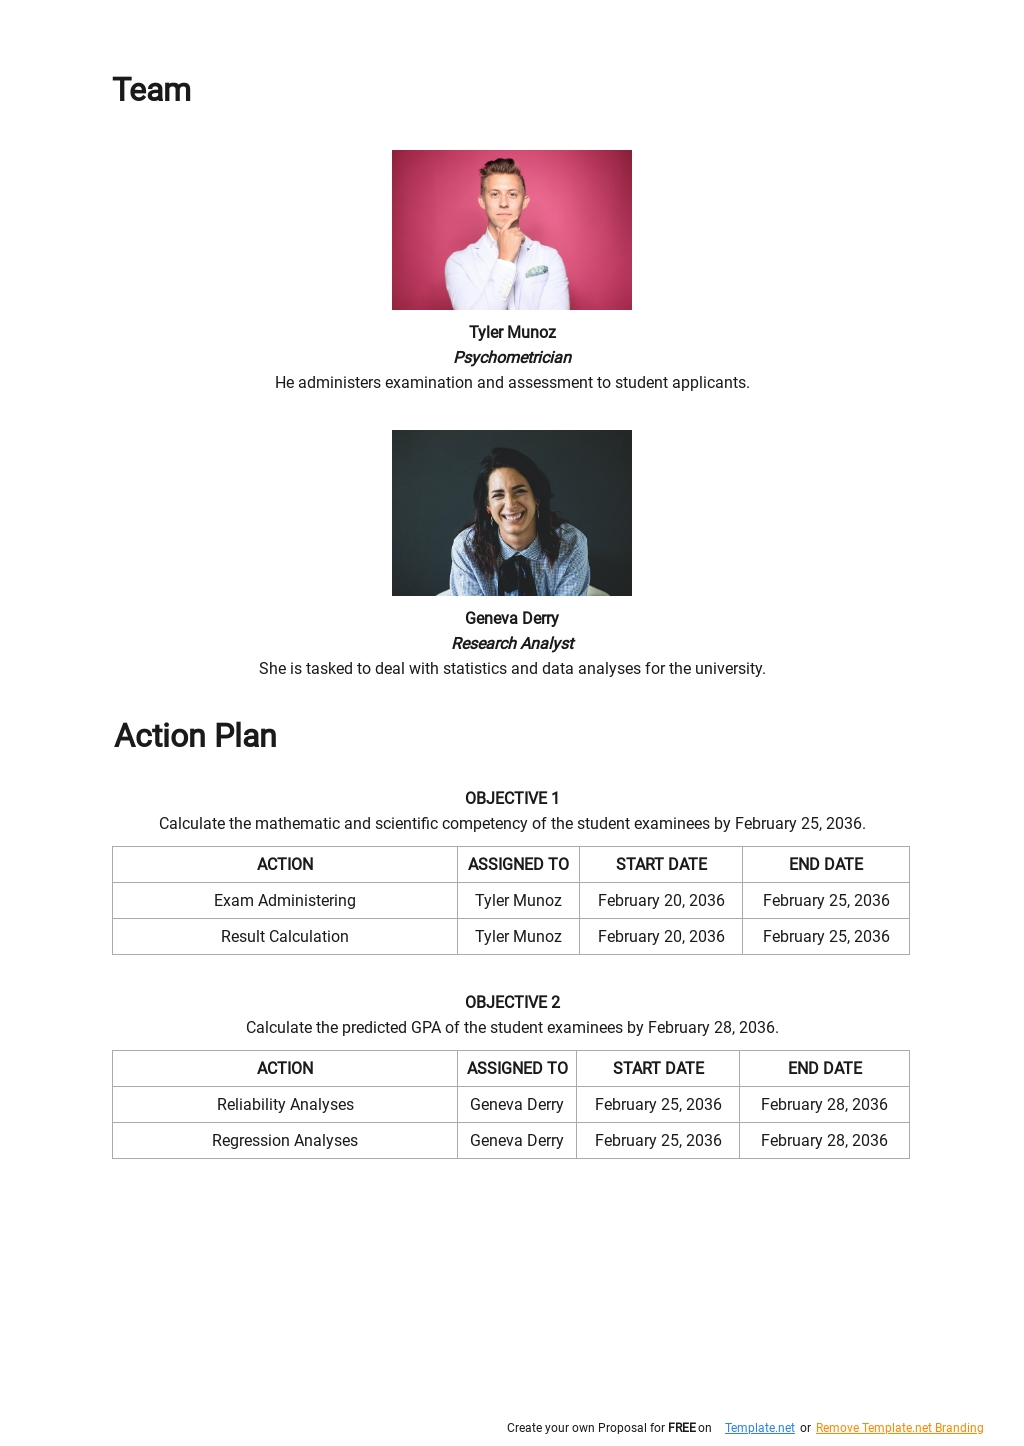 Data Management and Analysis Plan Template 2.jpe